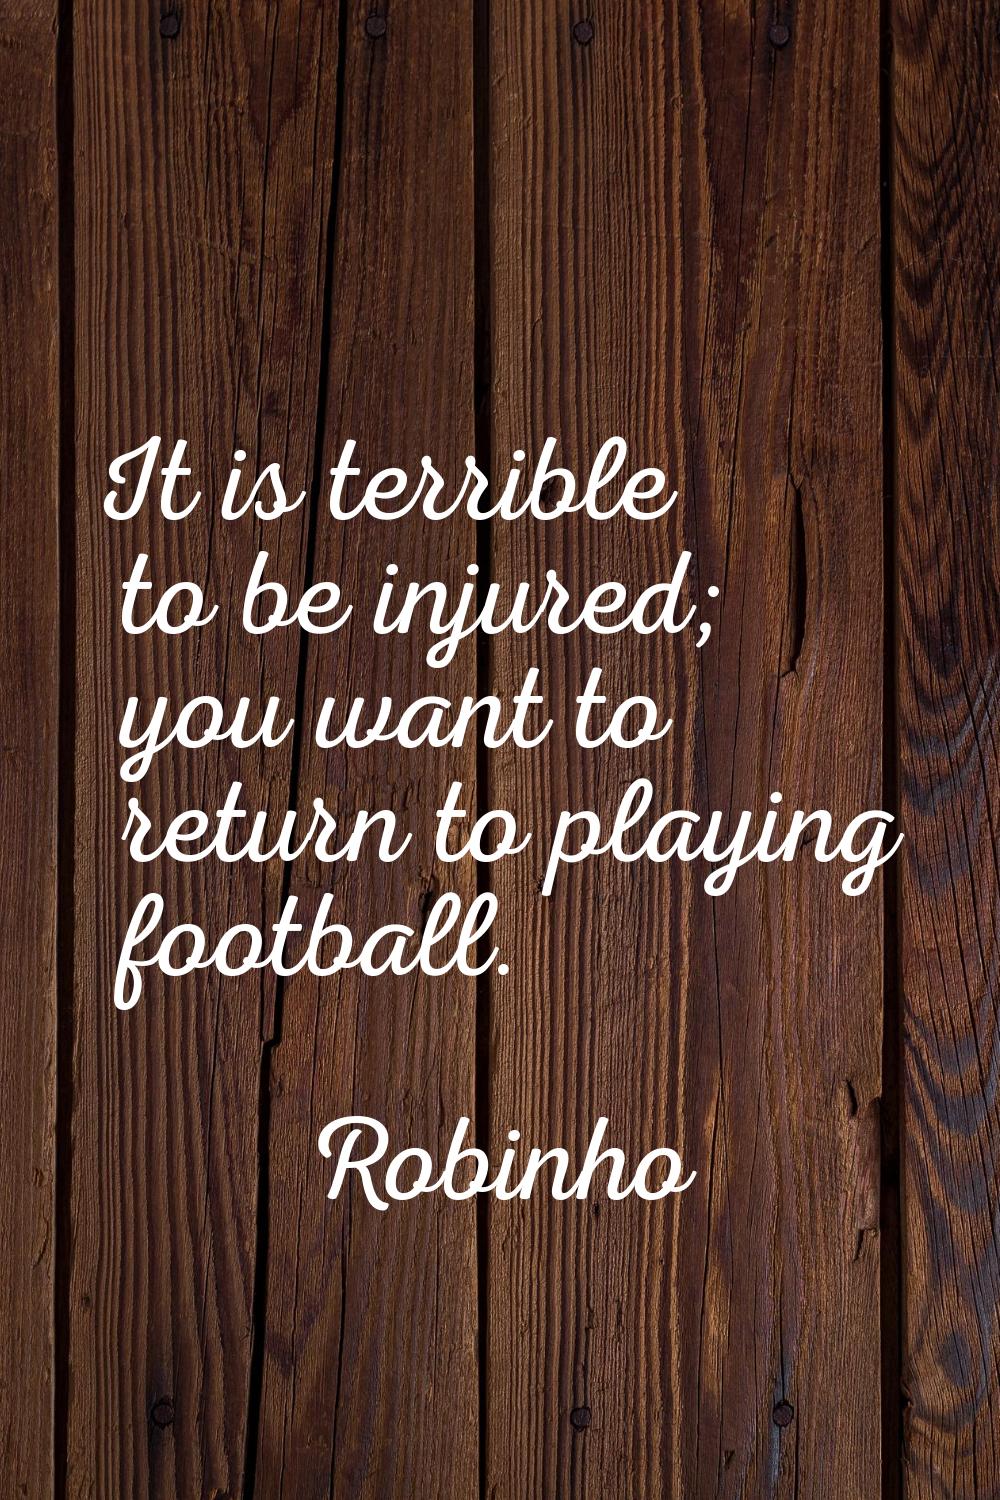 It is terrible to be injured; you want to return to playing football.